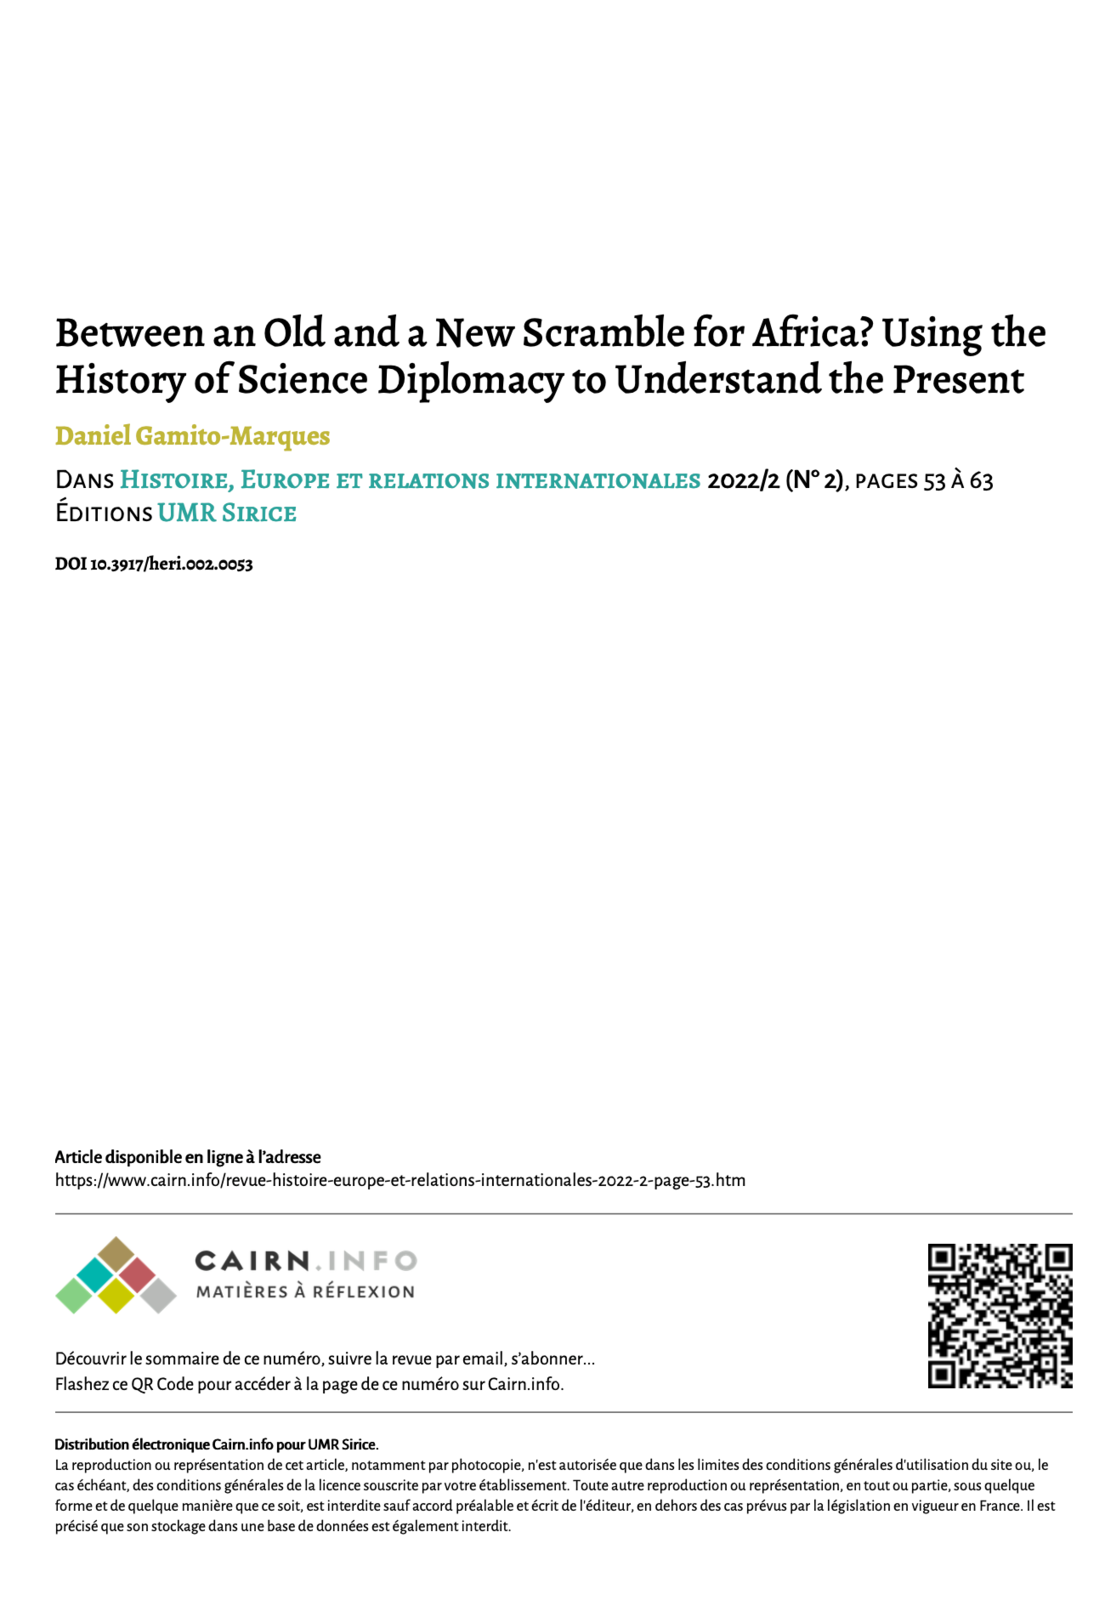 Between an Old and a New Scramble for Africa? Using the History of Science Diplomacy to Understand the Present, Capa